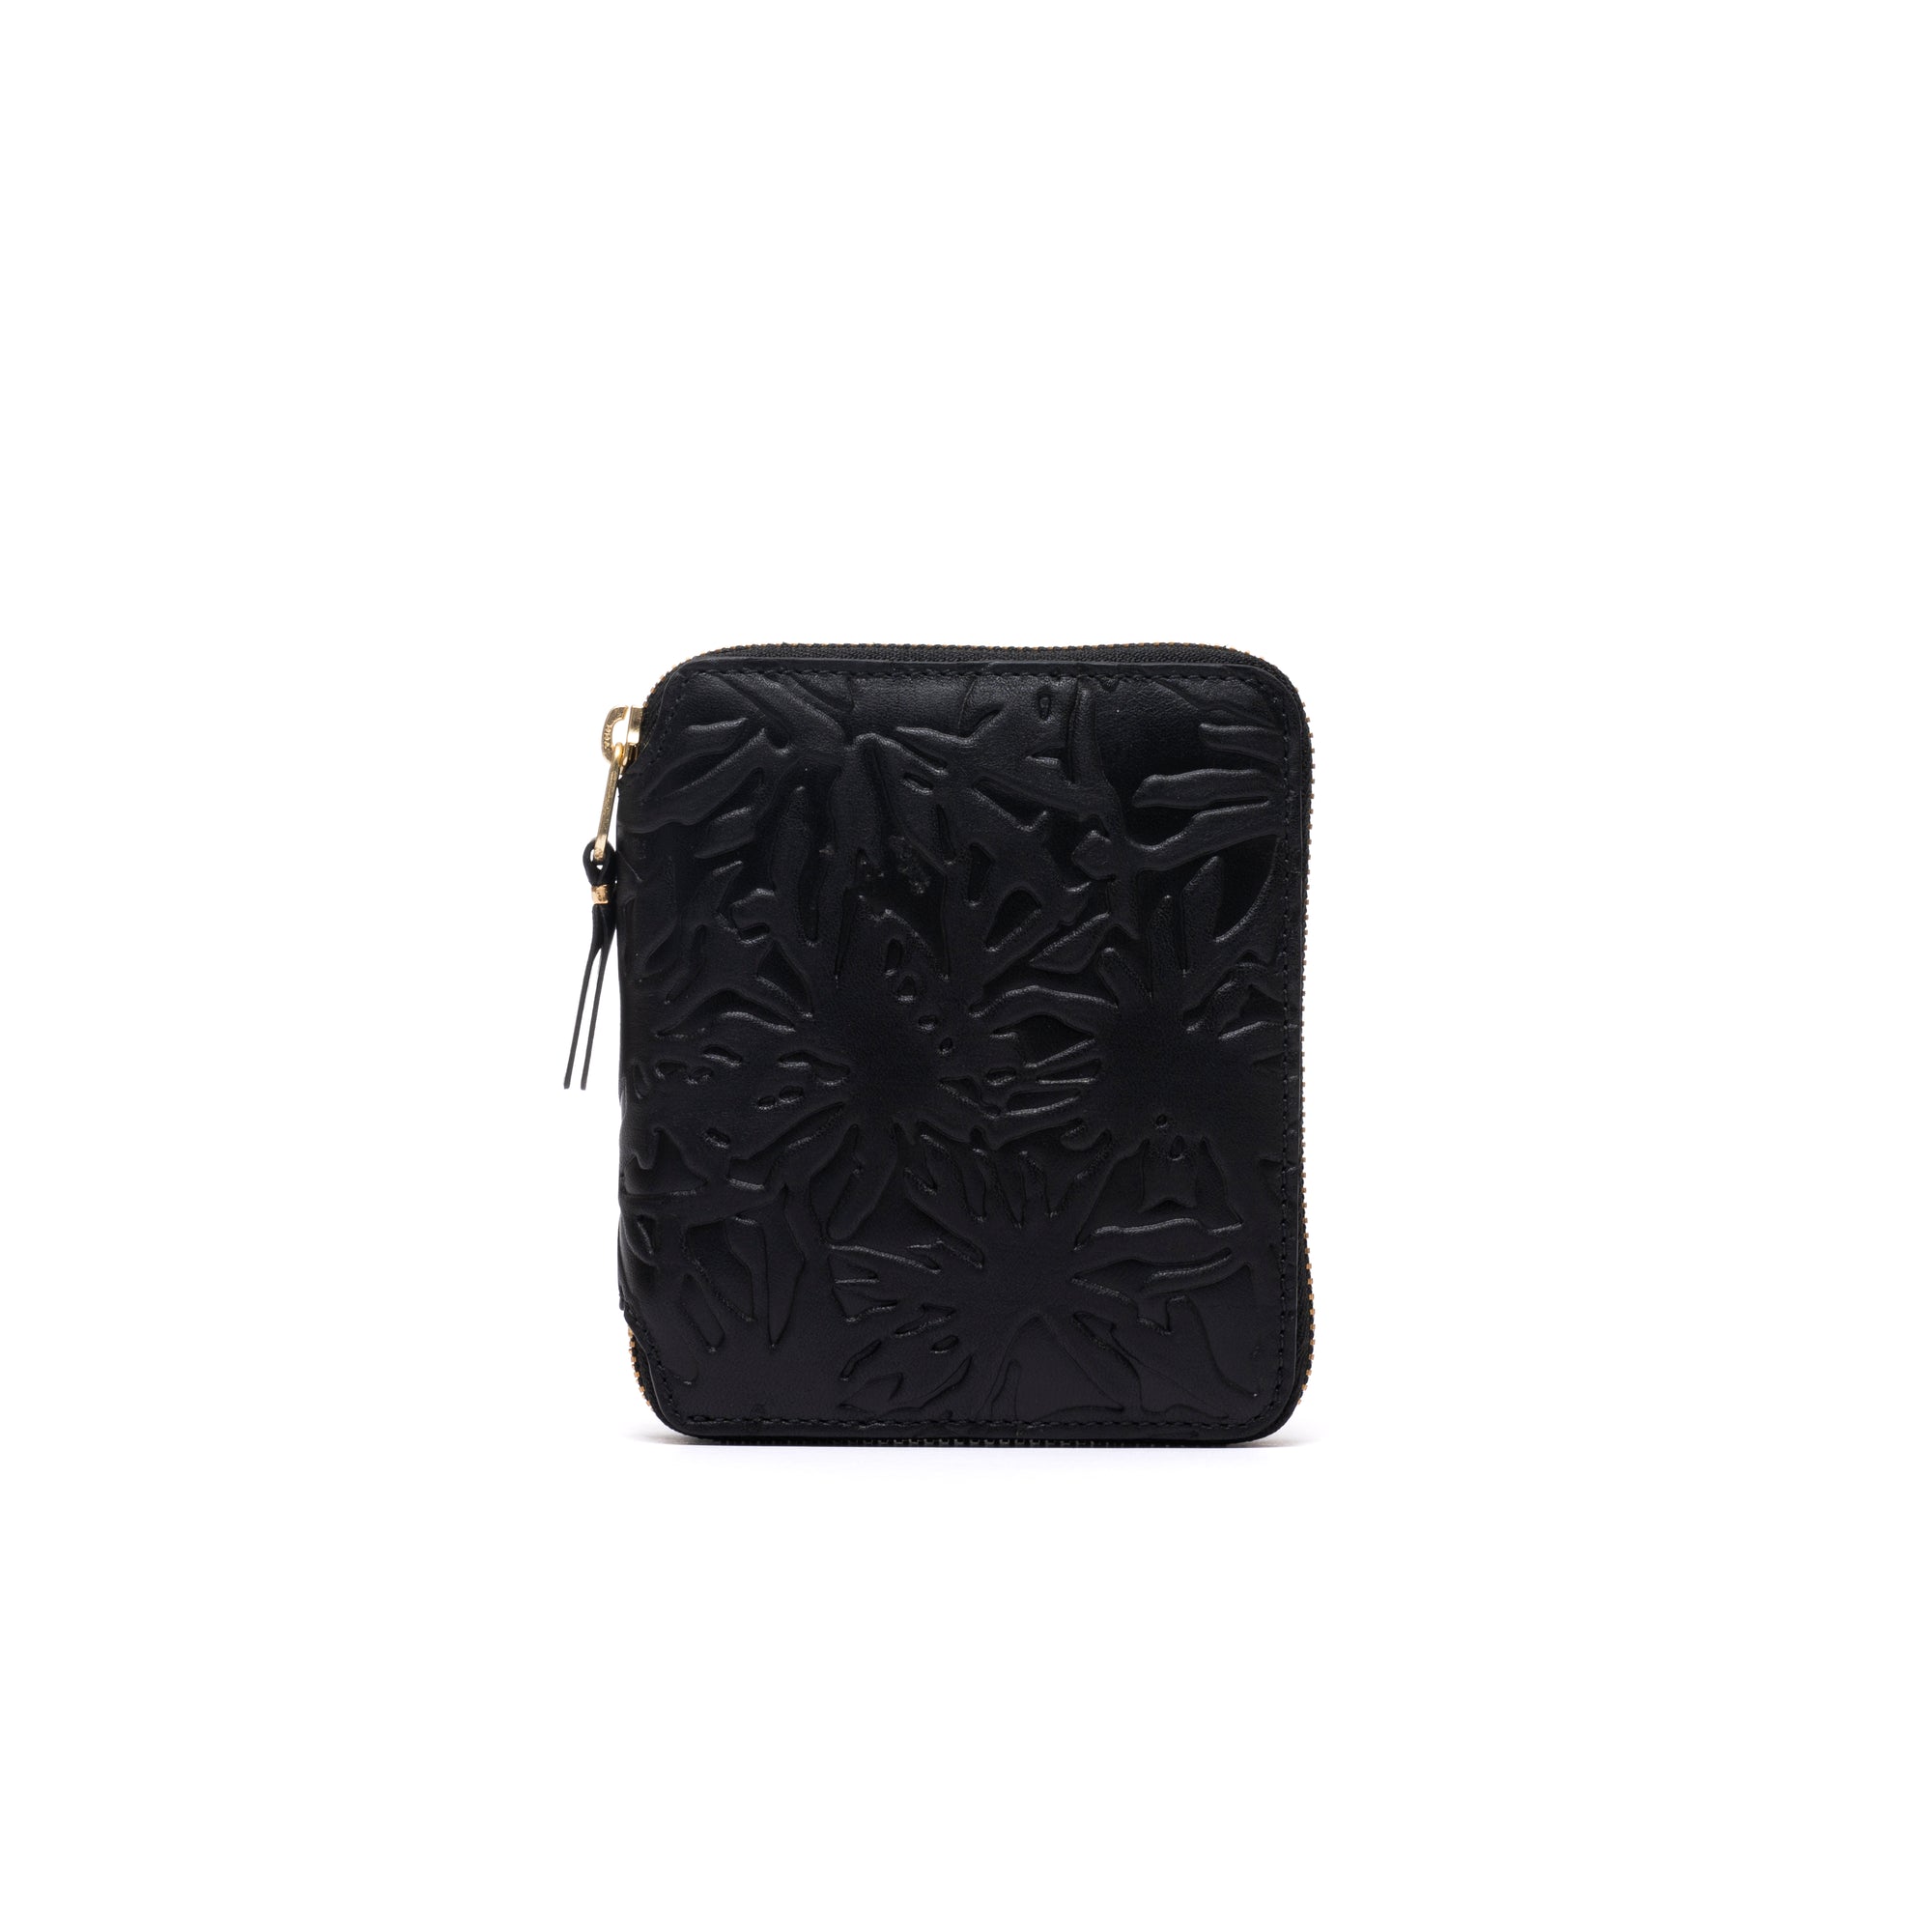 CDG WALLET - Embossed Forest - (SA2100EF Black) view 1